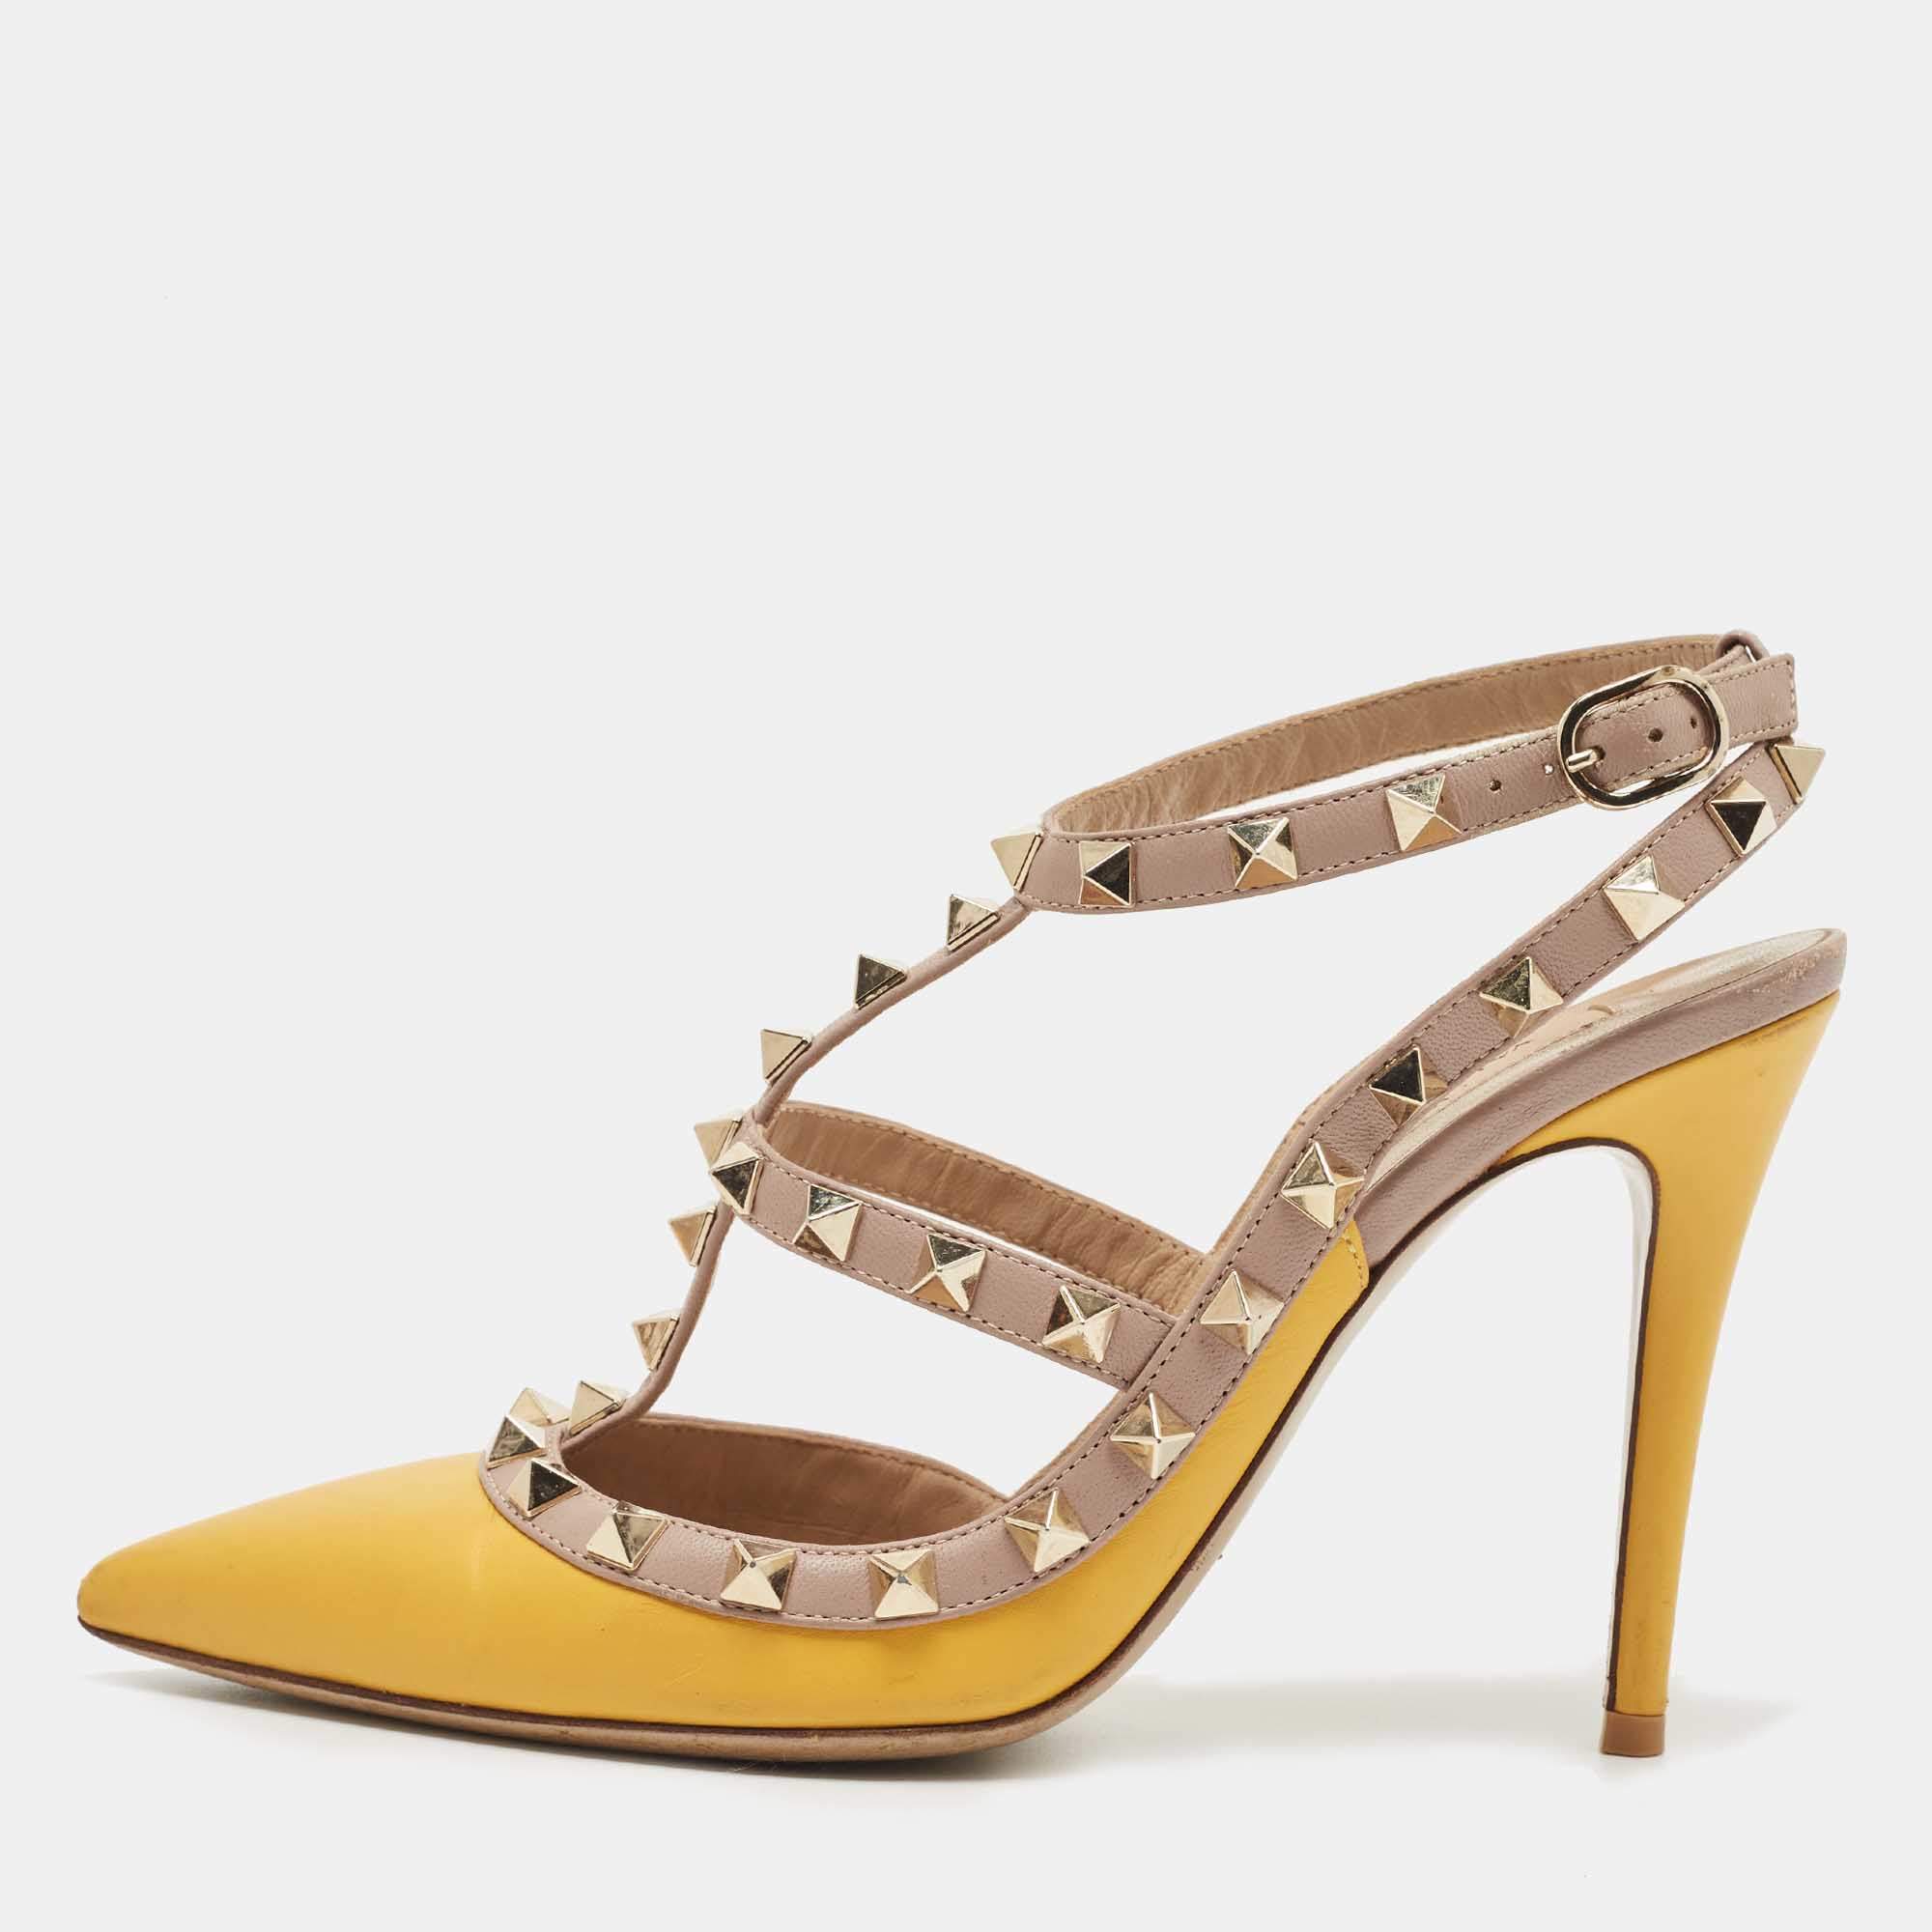 Yellow/Beige Leather Rockstud Pointed Toe Pumps Size 36.5 Valentino | TLC